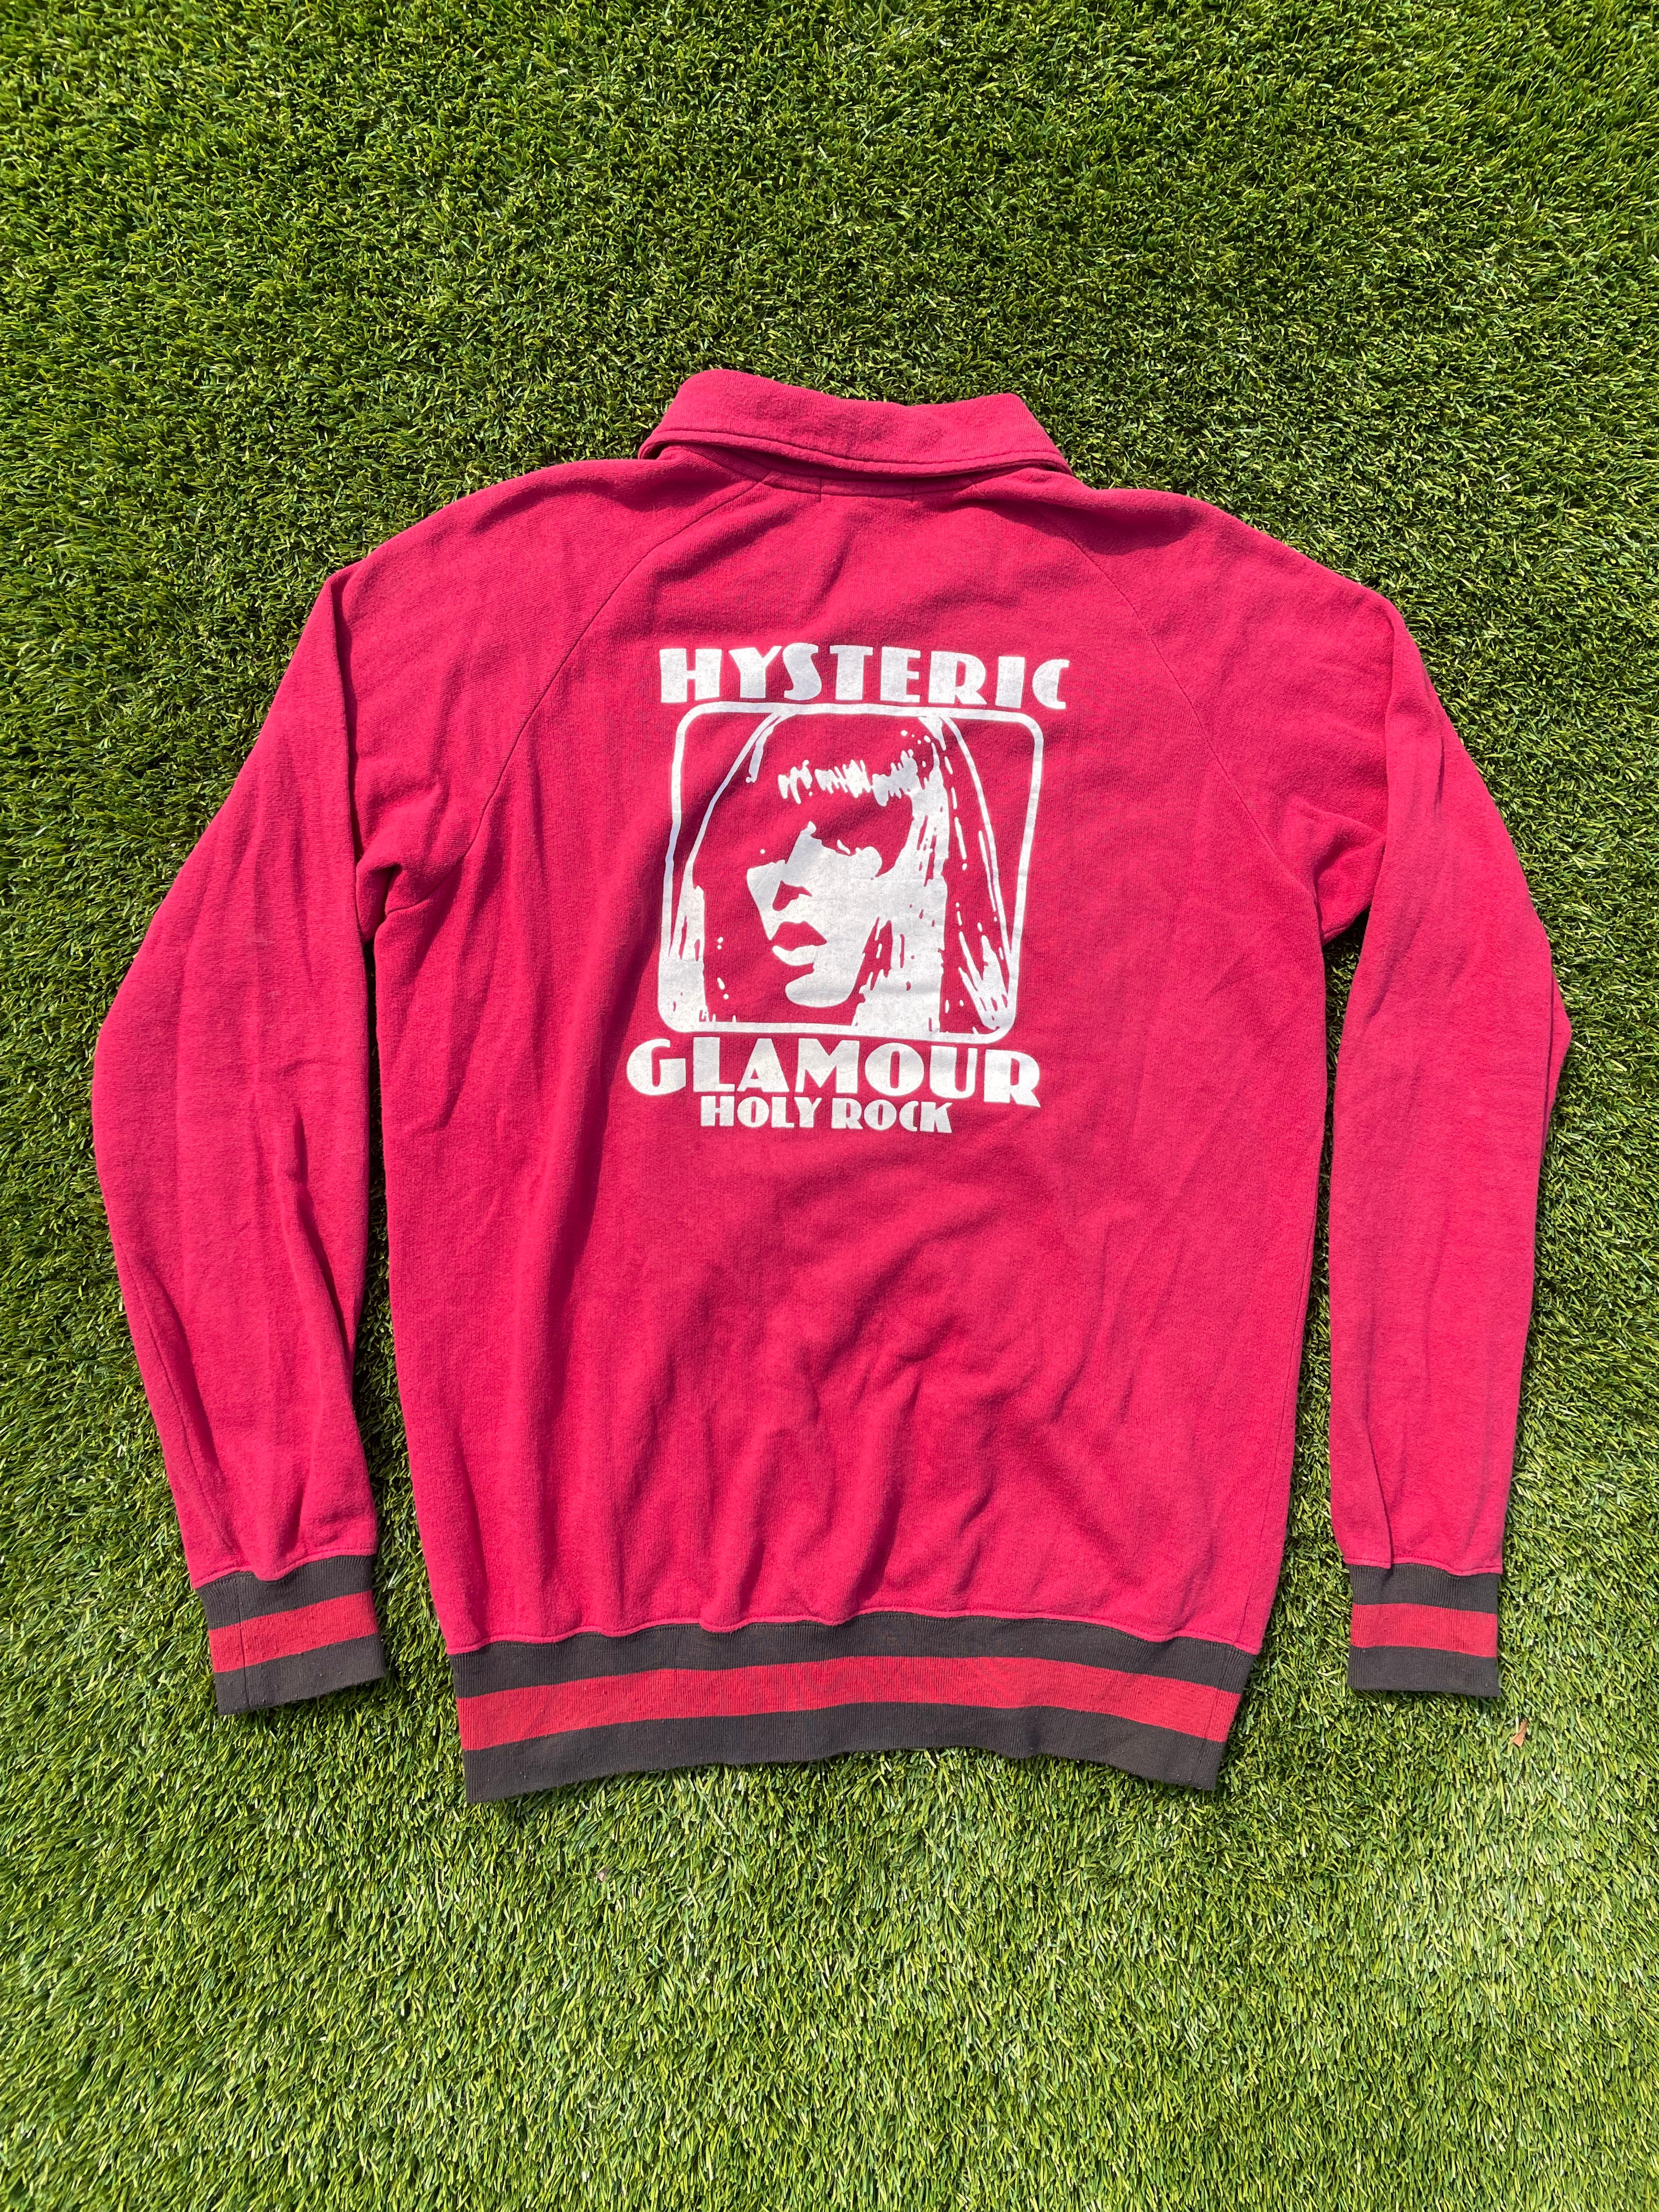 Hysteric Glamour “Holy Rock” Zip Up Jacket – rwndbckwrds